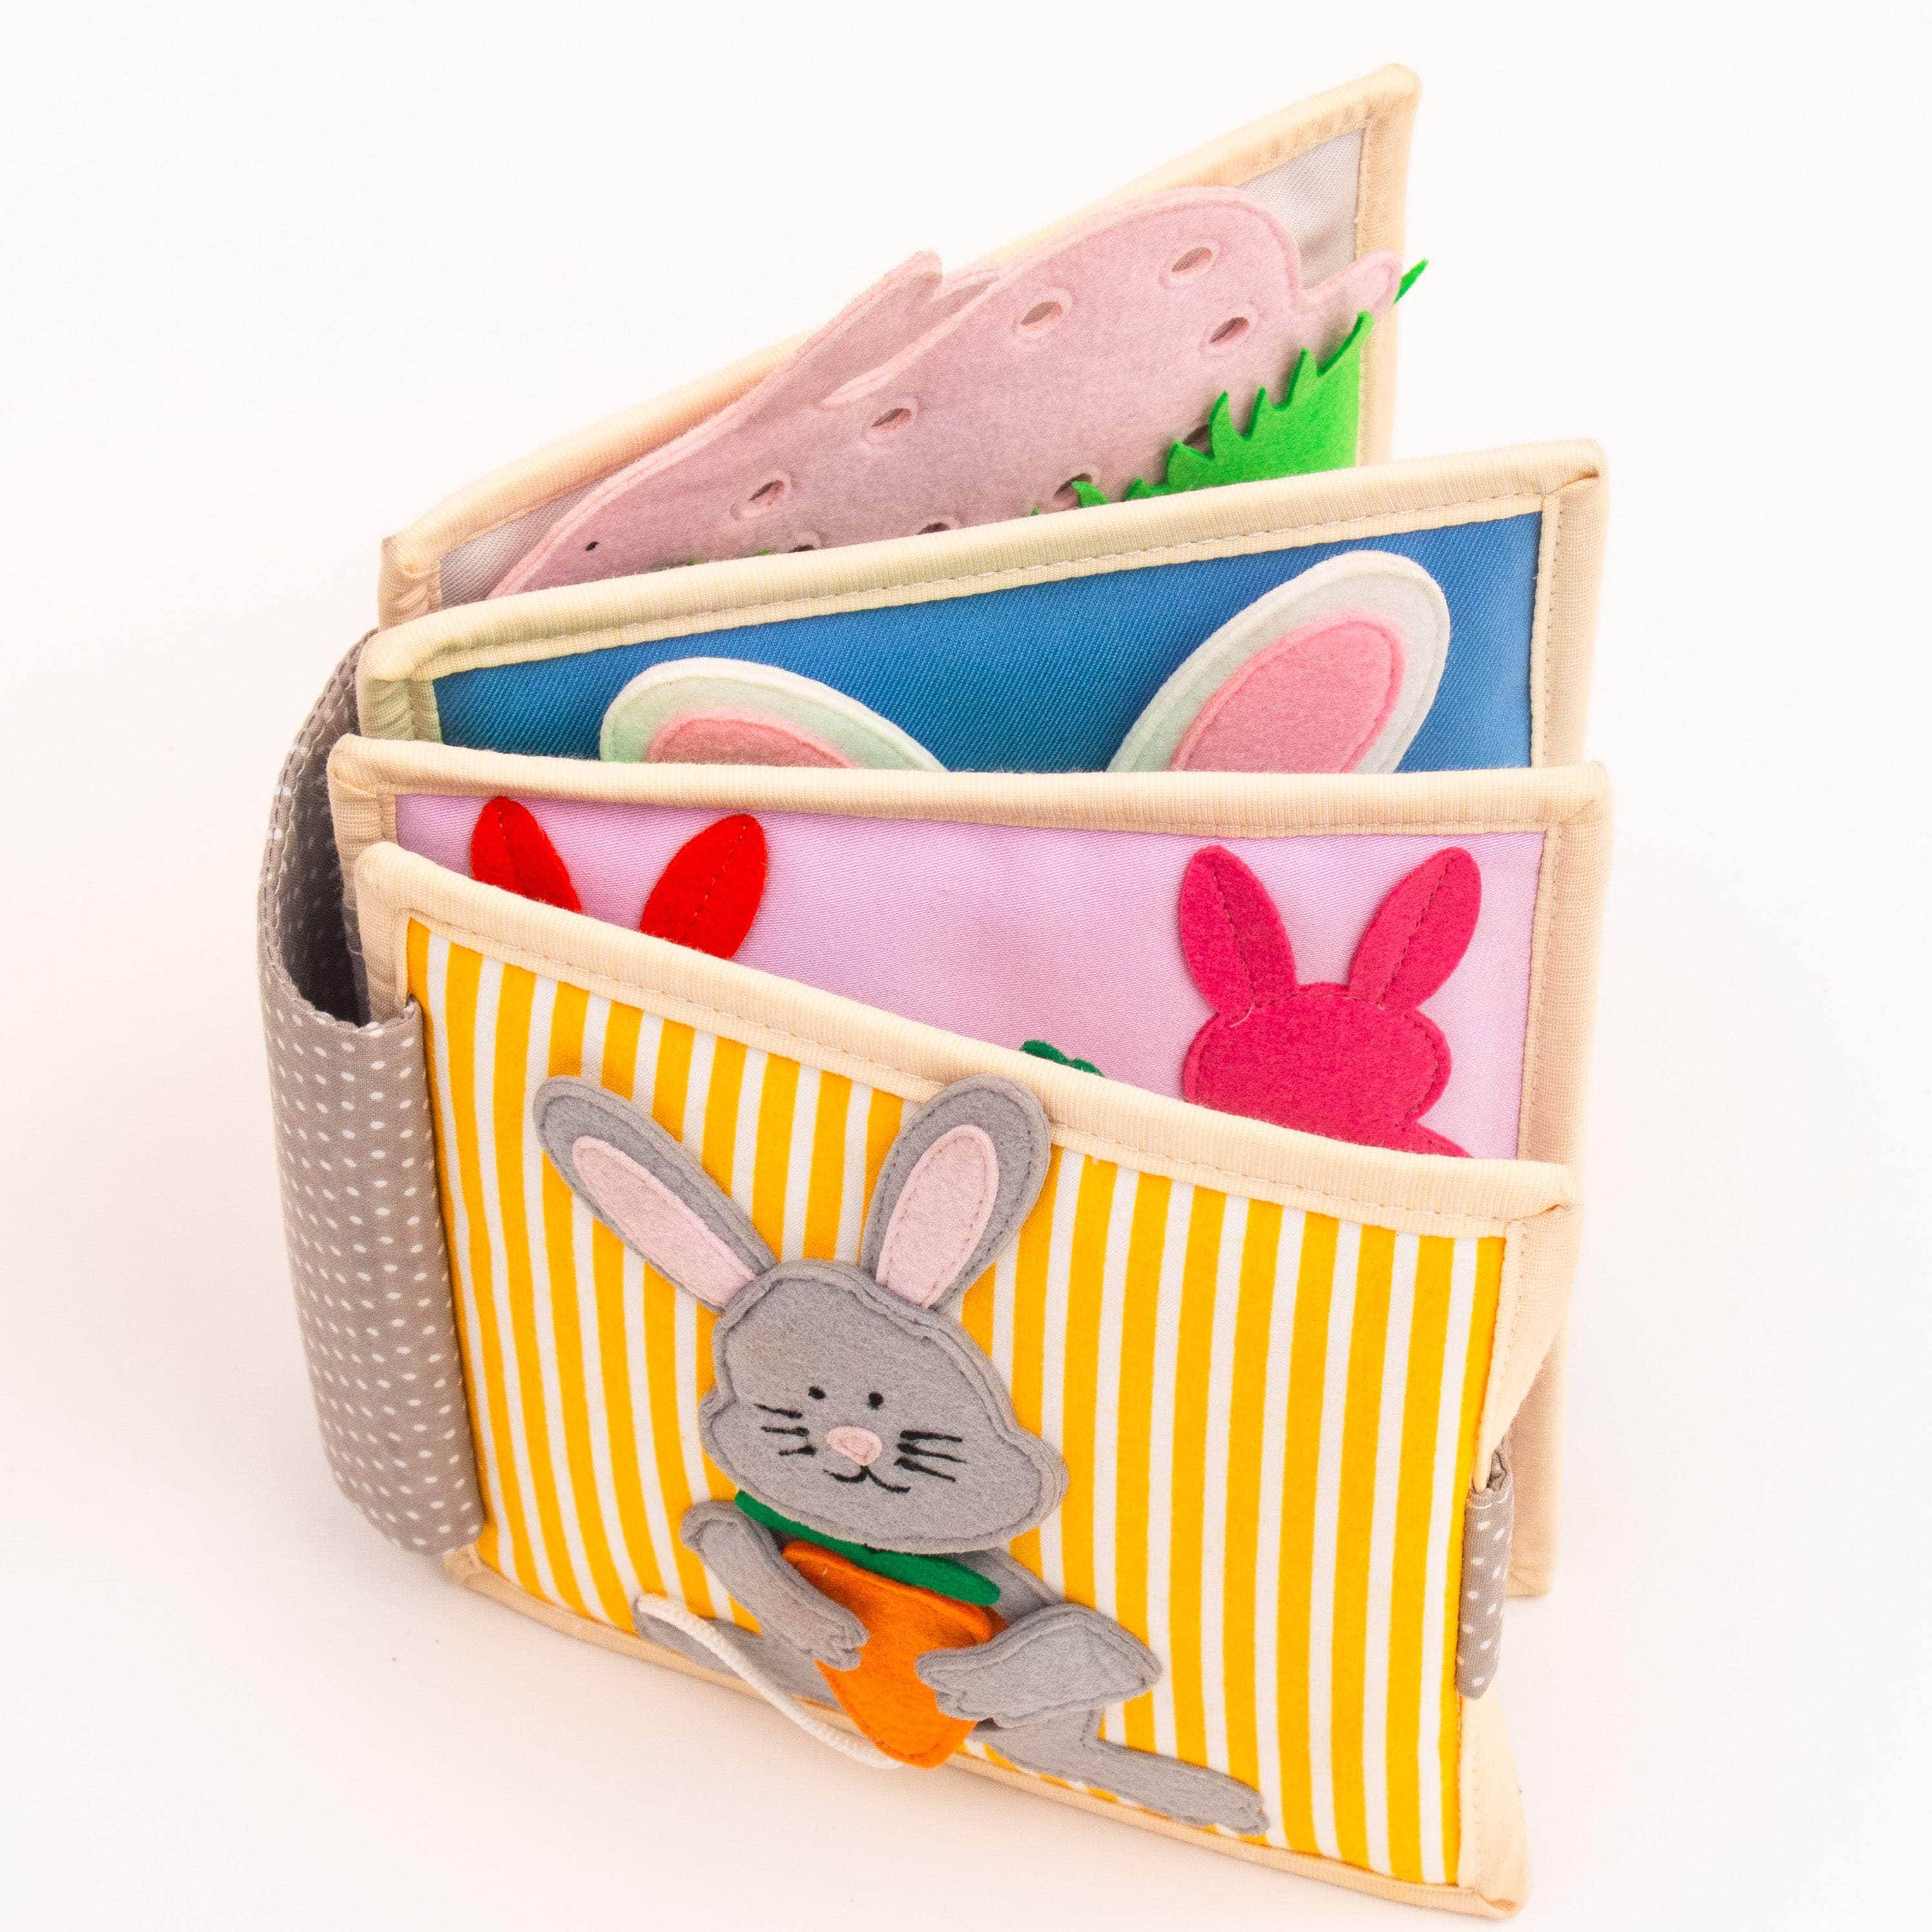 Funny Bunny - 6 pages Mini Quiet Book